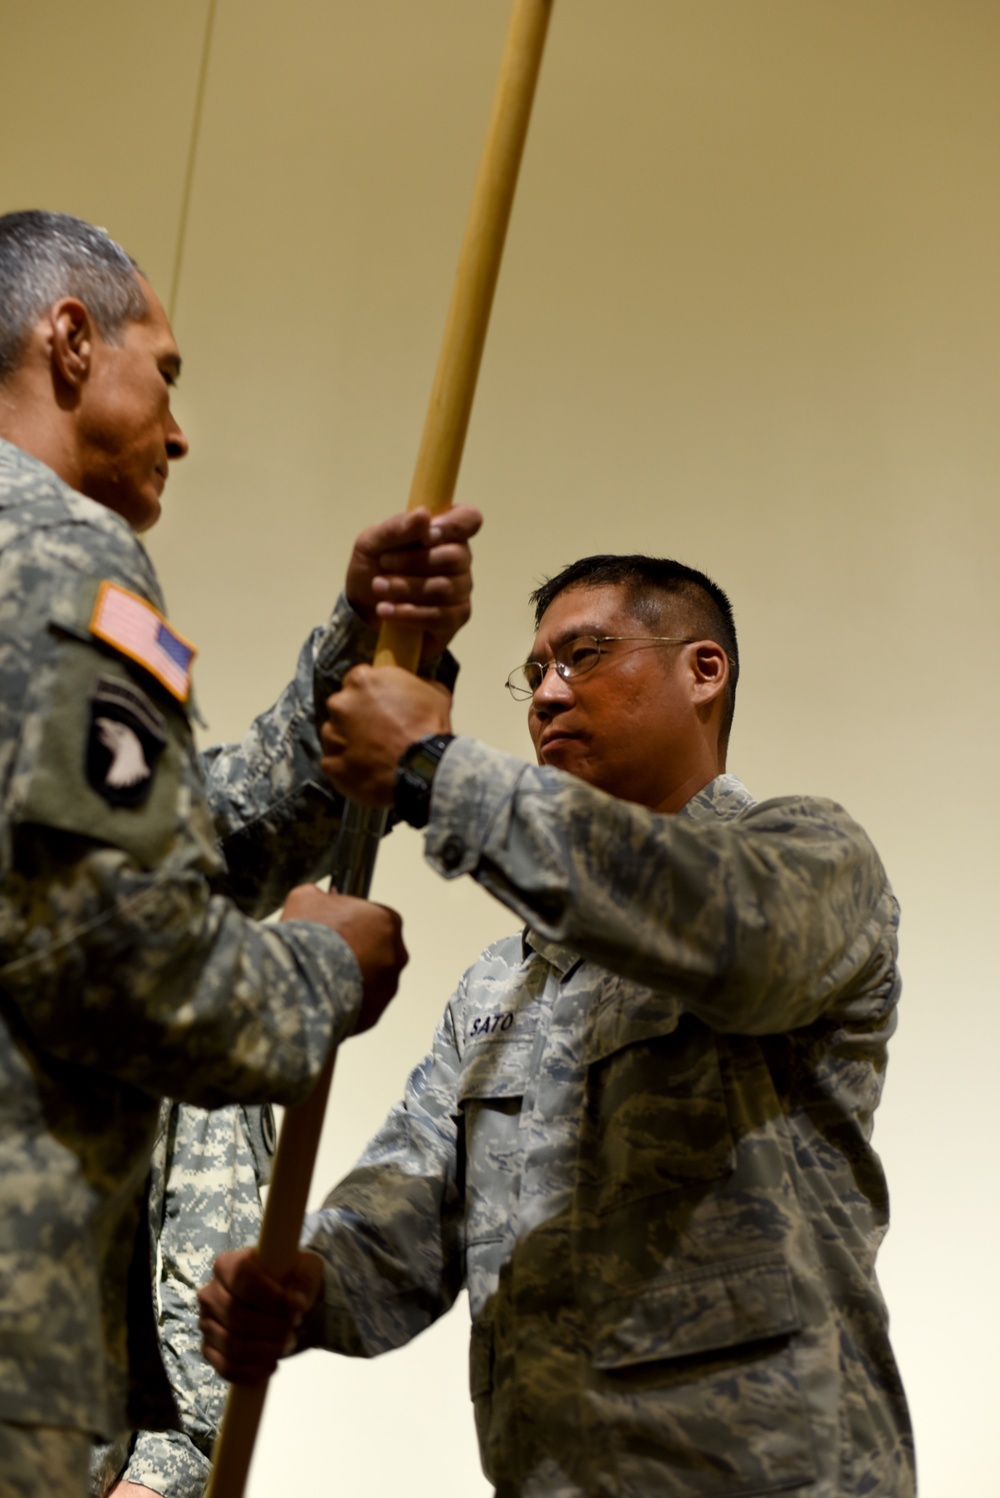 93rd Civil Support Team change of command ceremony